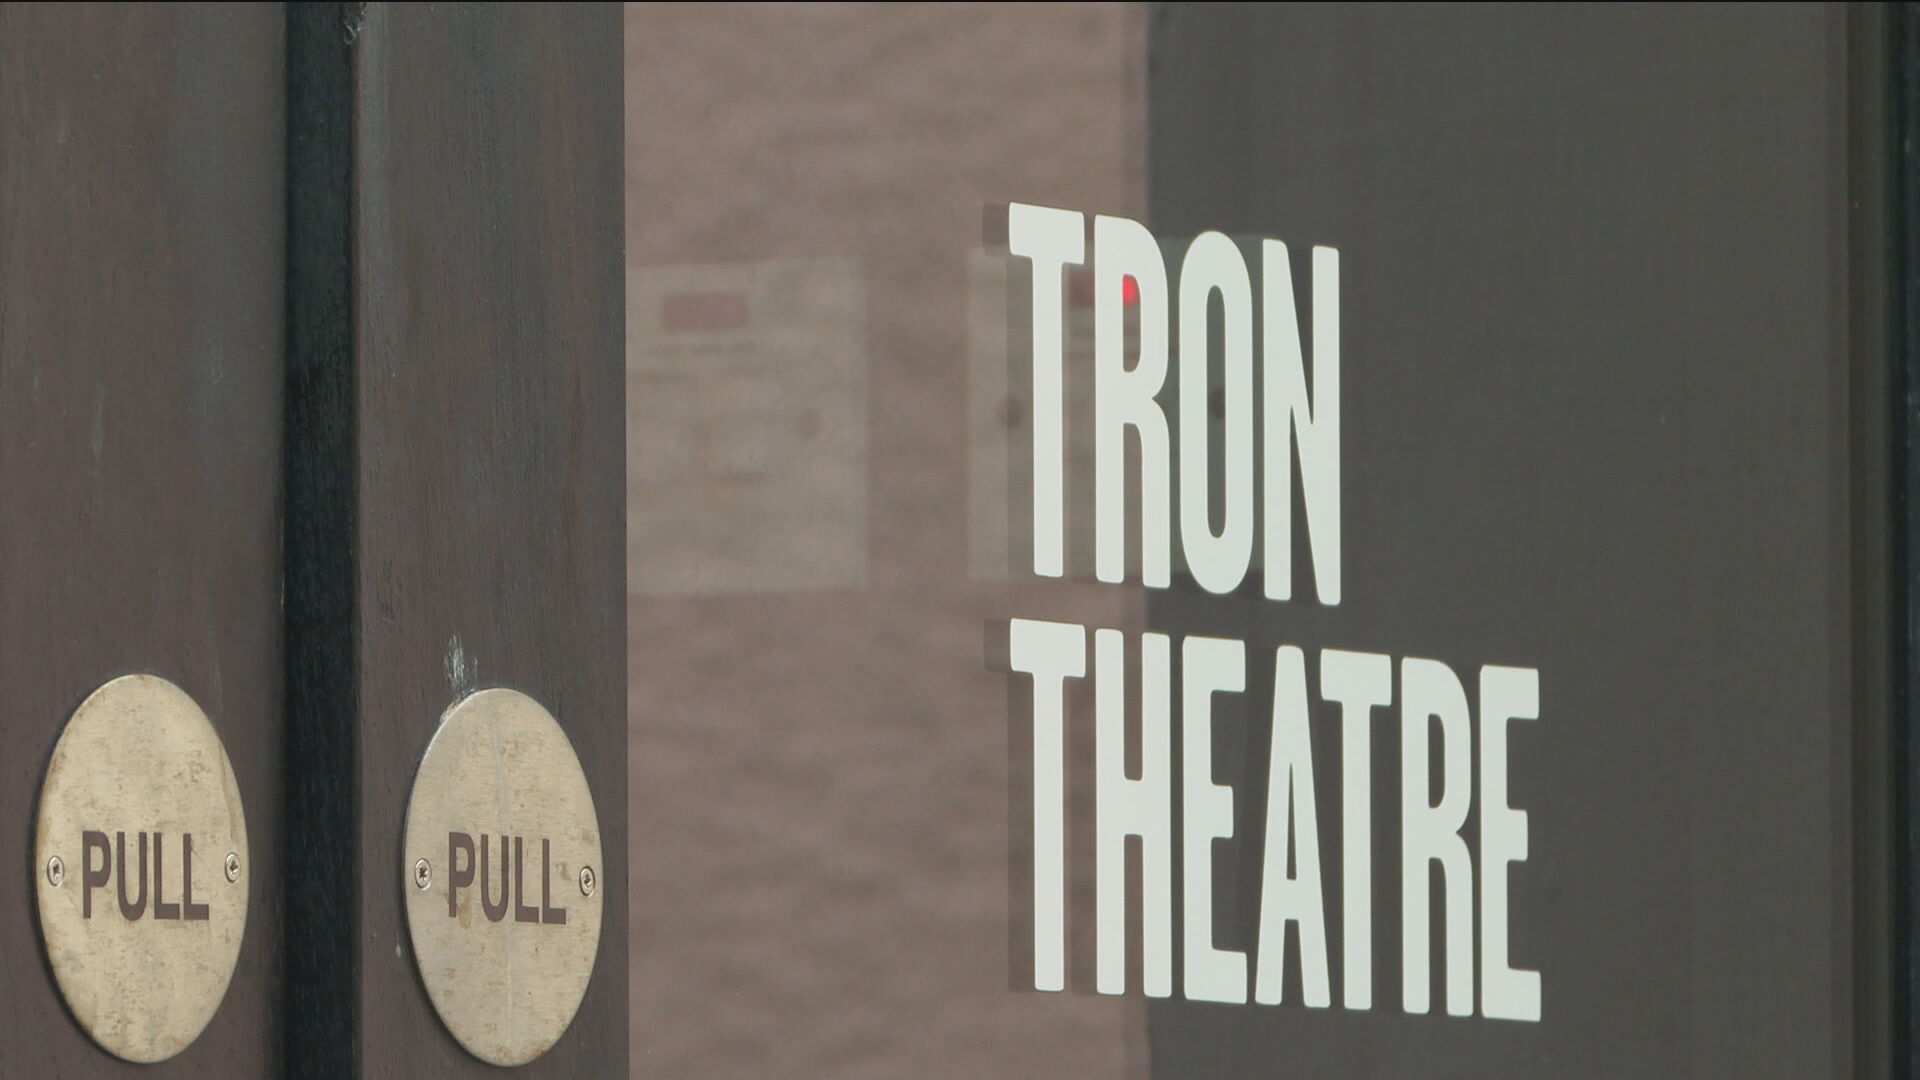 The Tron Theatre has had its funding cut by Glasgow City Council.